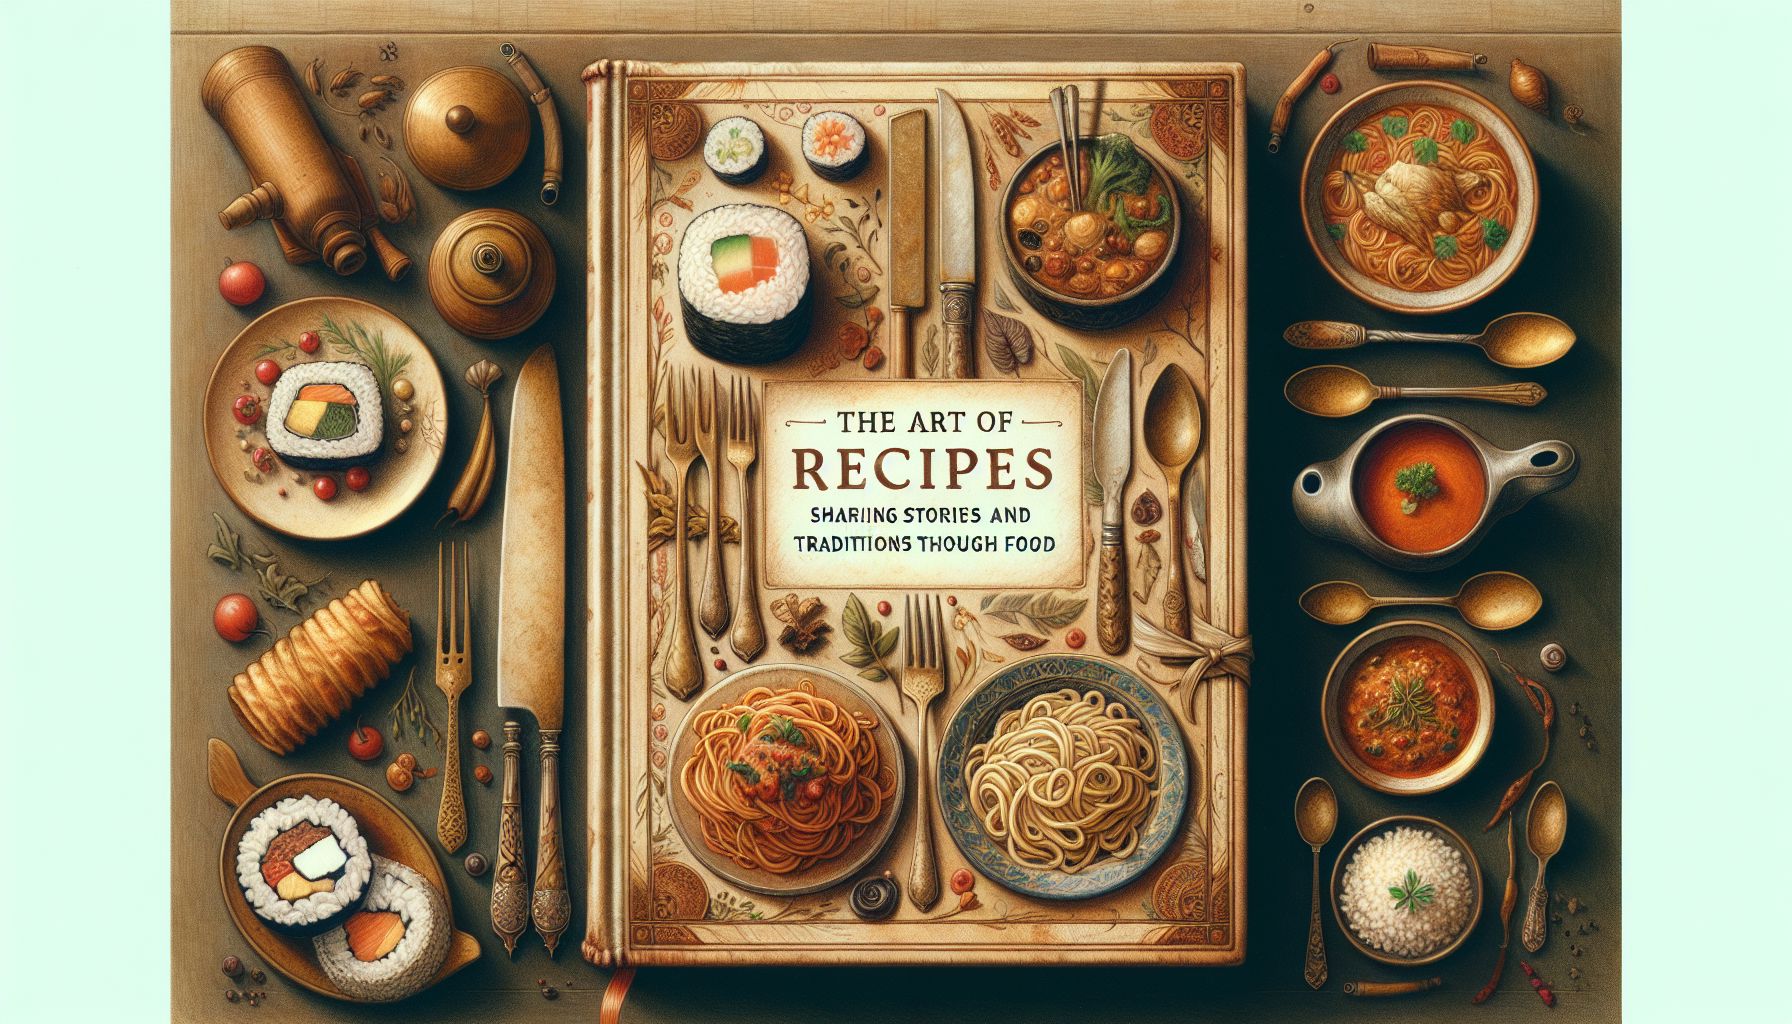 The Art of Recipes: Sharing Stories and Traditions Through Food